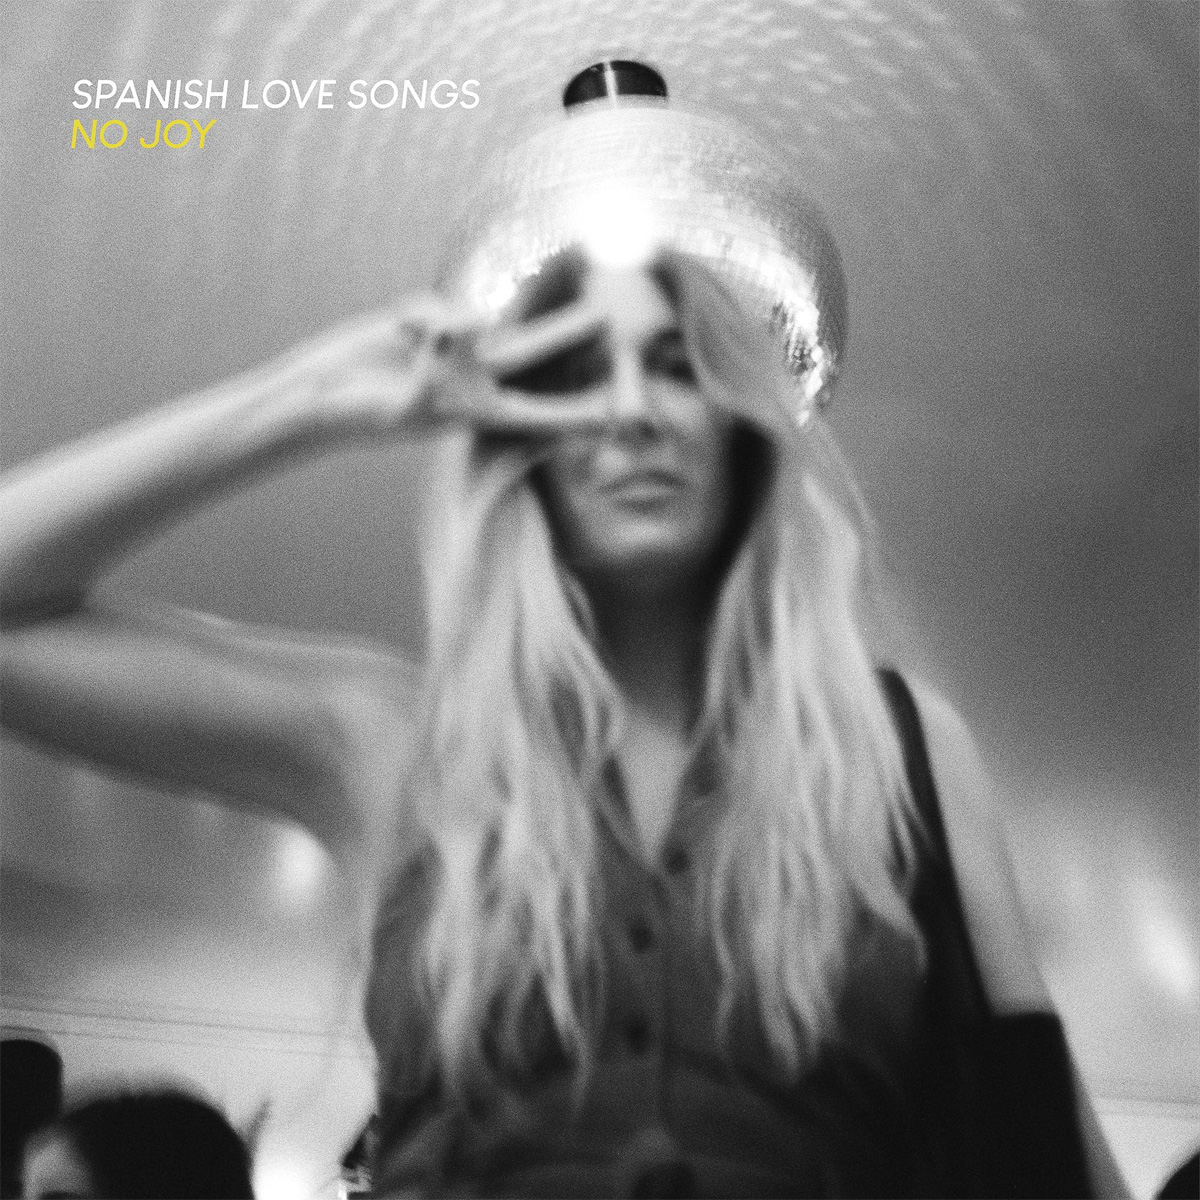 REVIEW: ‘No Joy’ By Spanish Love Songs Delivers On Heavy Emotion And Progression